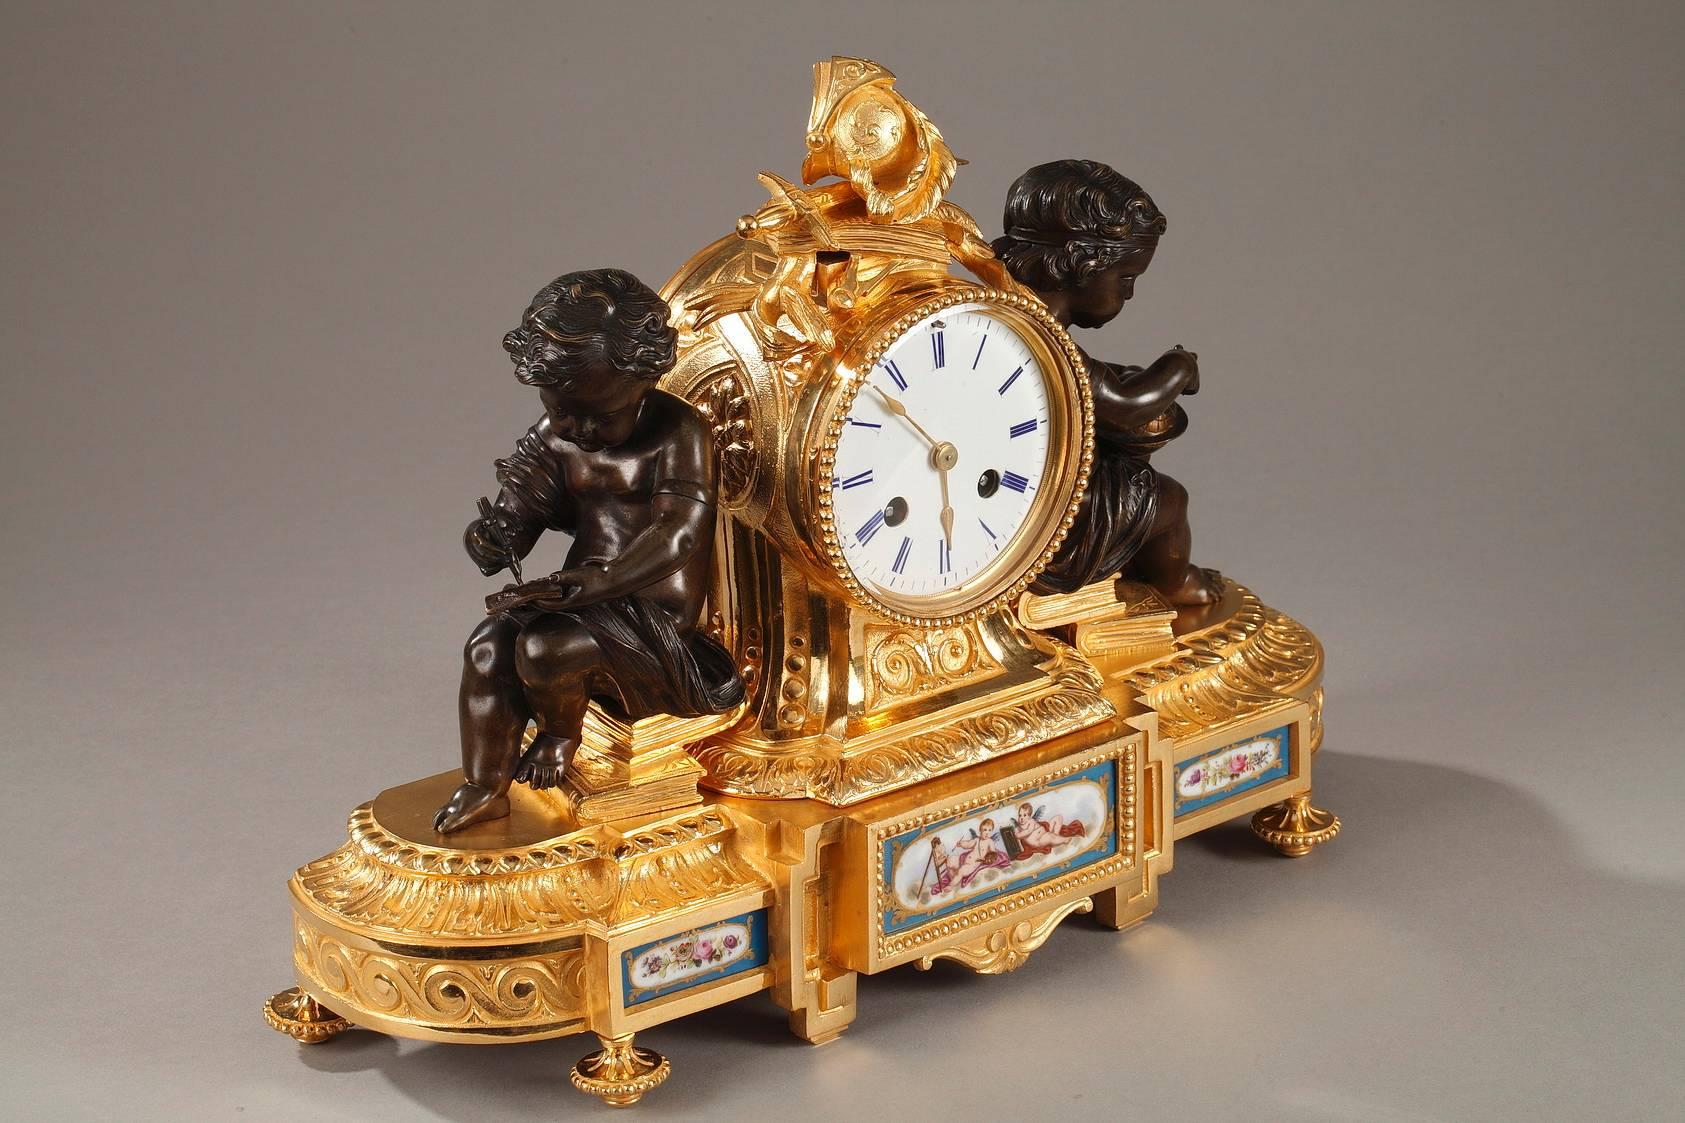 Napoleon III ormolu mantel clock in Louis XVI style. The clock features military motifs as well as two patinated bronze putti sitting on books, which represent the arts. The oval base is decorated with three porcelain plates depicting two winged